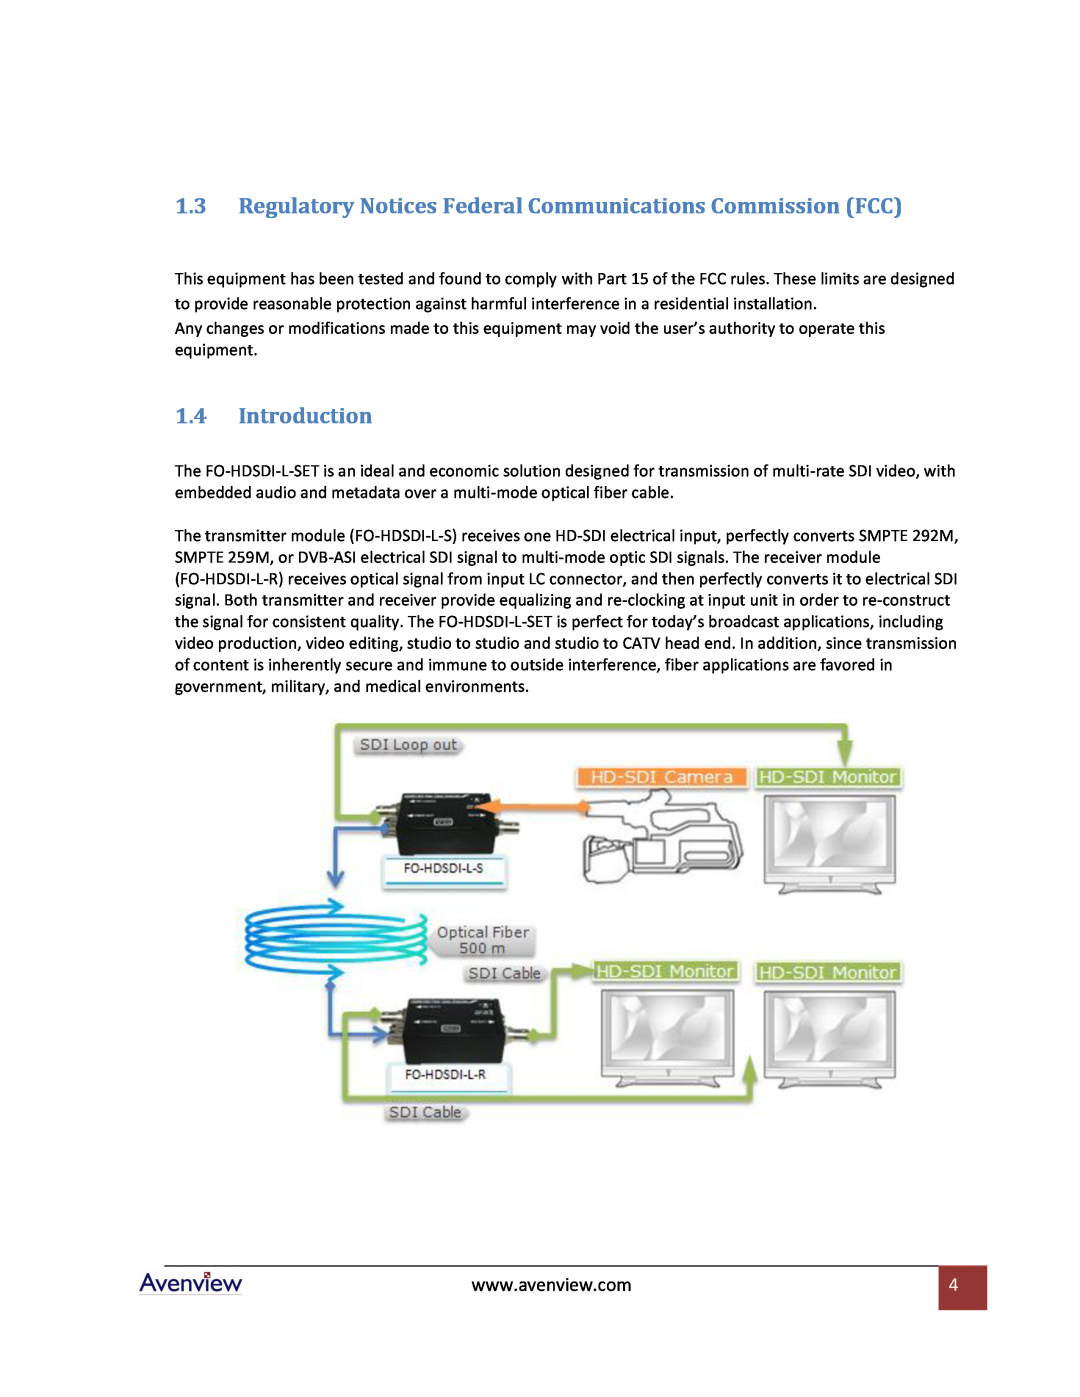 Avenview FO-HDSDI-L-SET specifications Regulatory Notices Federal Communications Commission FCC, Introduction 